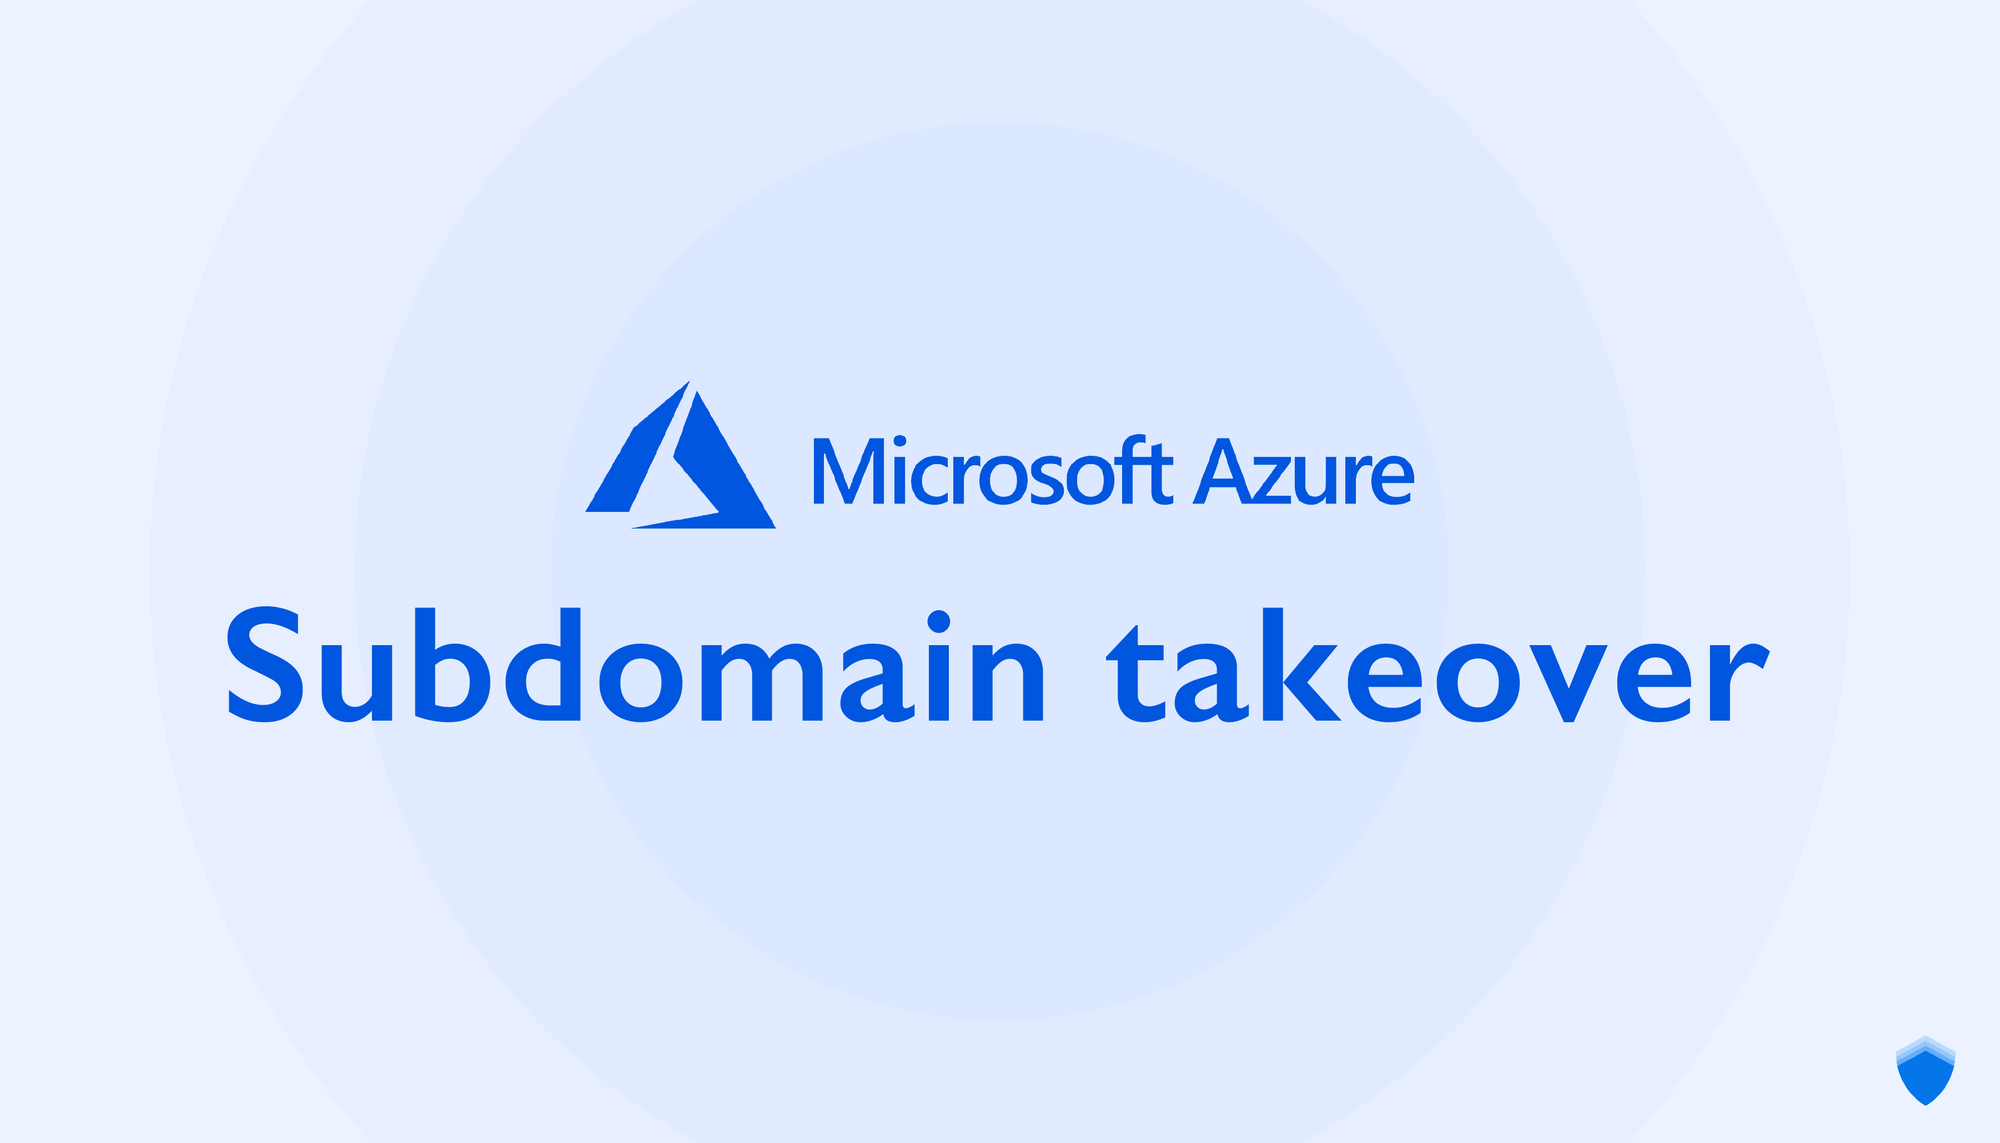 Subdomain takeover &#8211; Chapter two: Azure Services